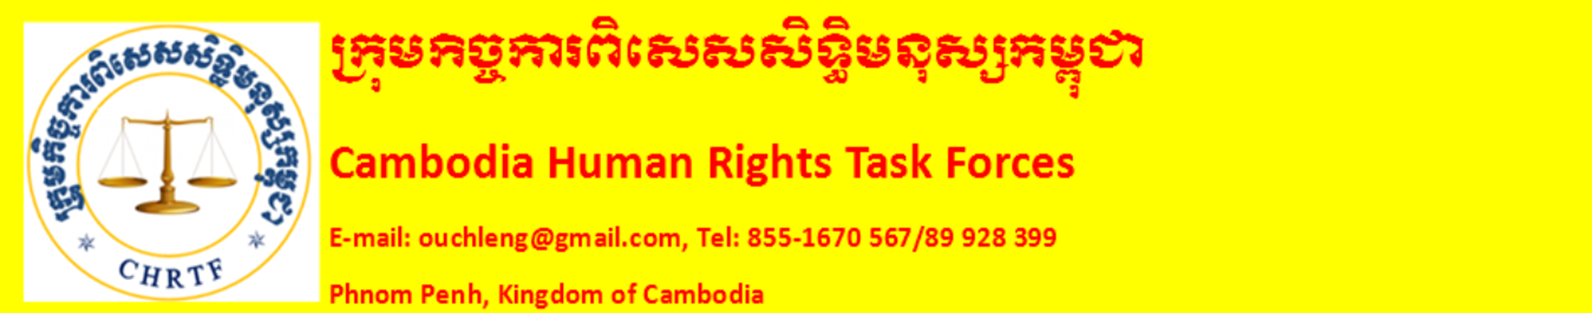 Cambodia Human Rights Task Forces